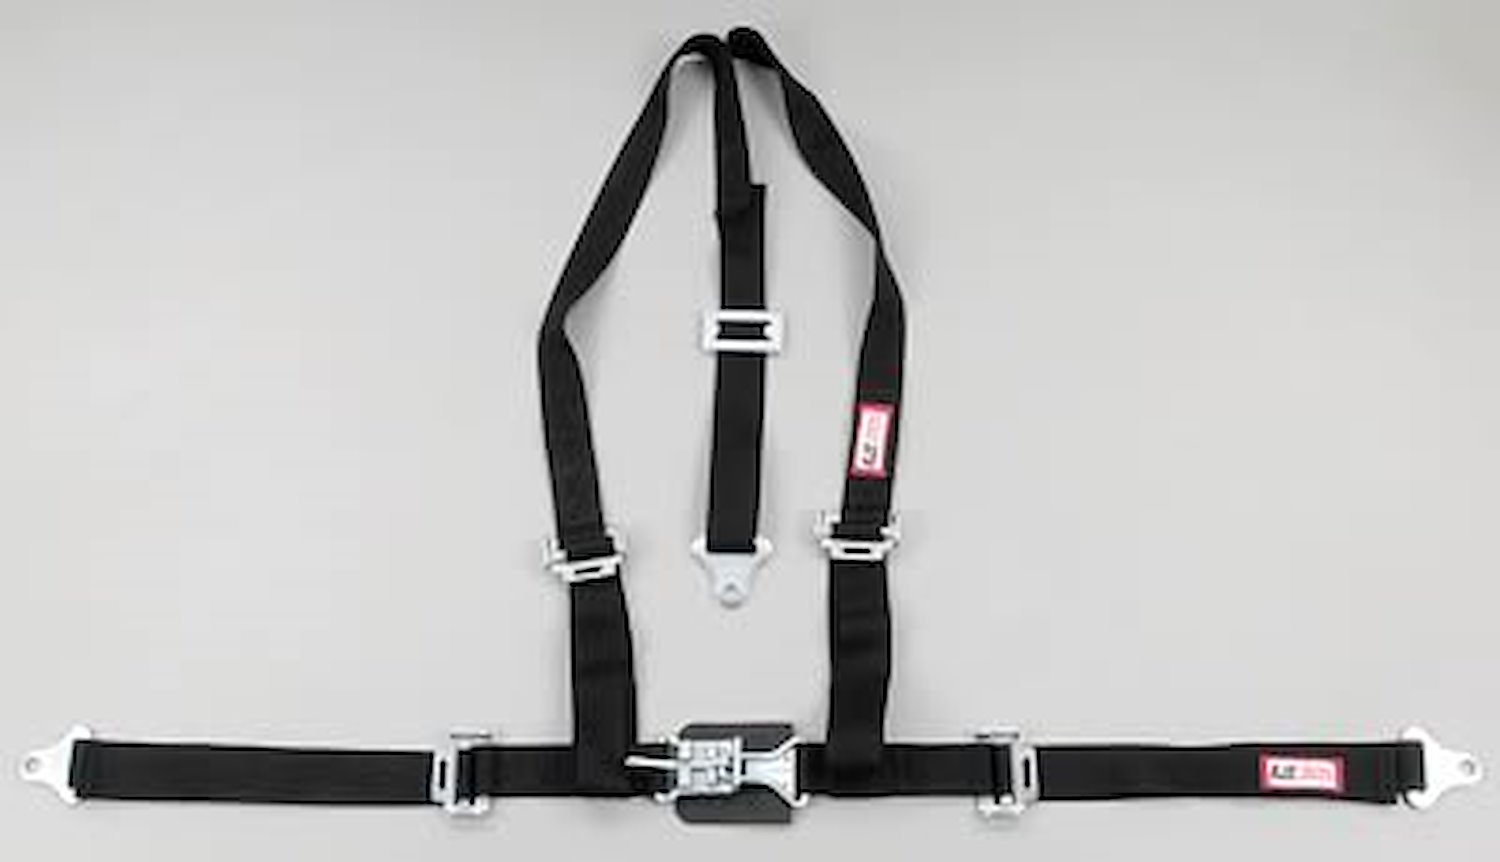 NON-SFI L&L HARNESS 3 PULL DOWN Lap BELT SNAP SEWN IN 2 S.H. Y FLOOR Mount WRAP/SNAP BLUE